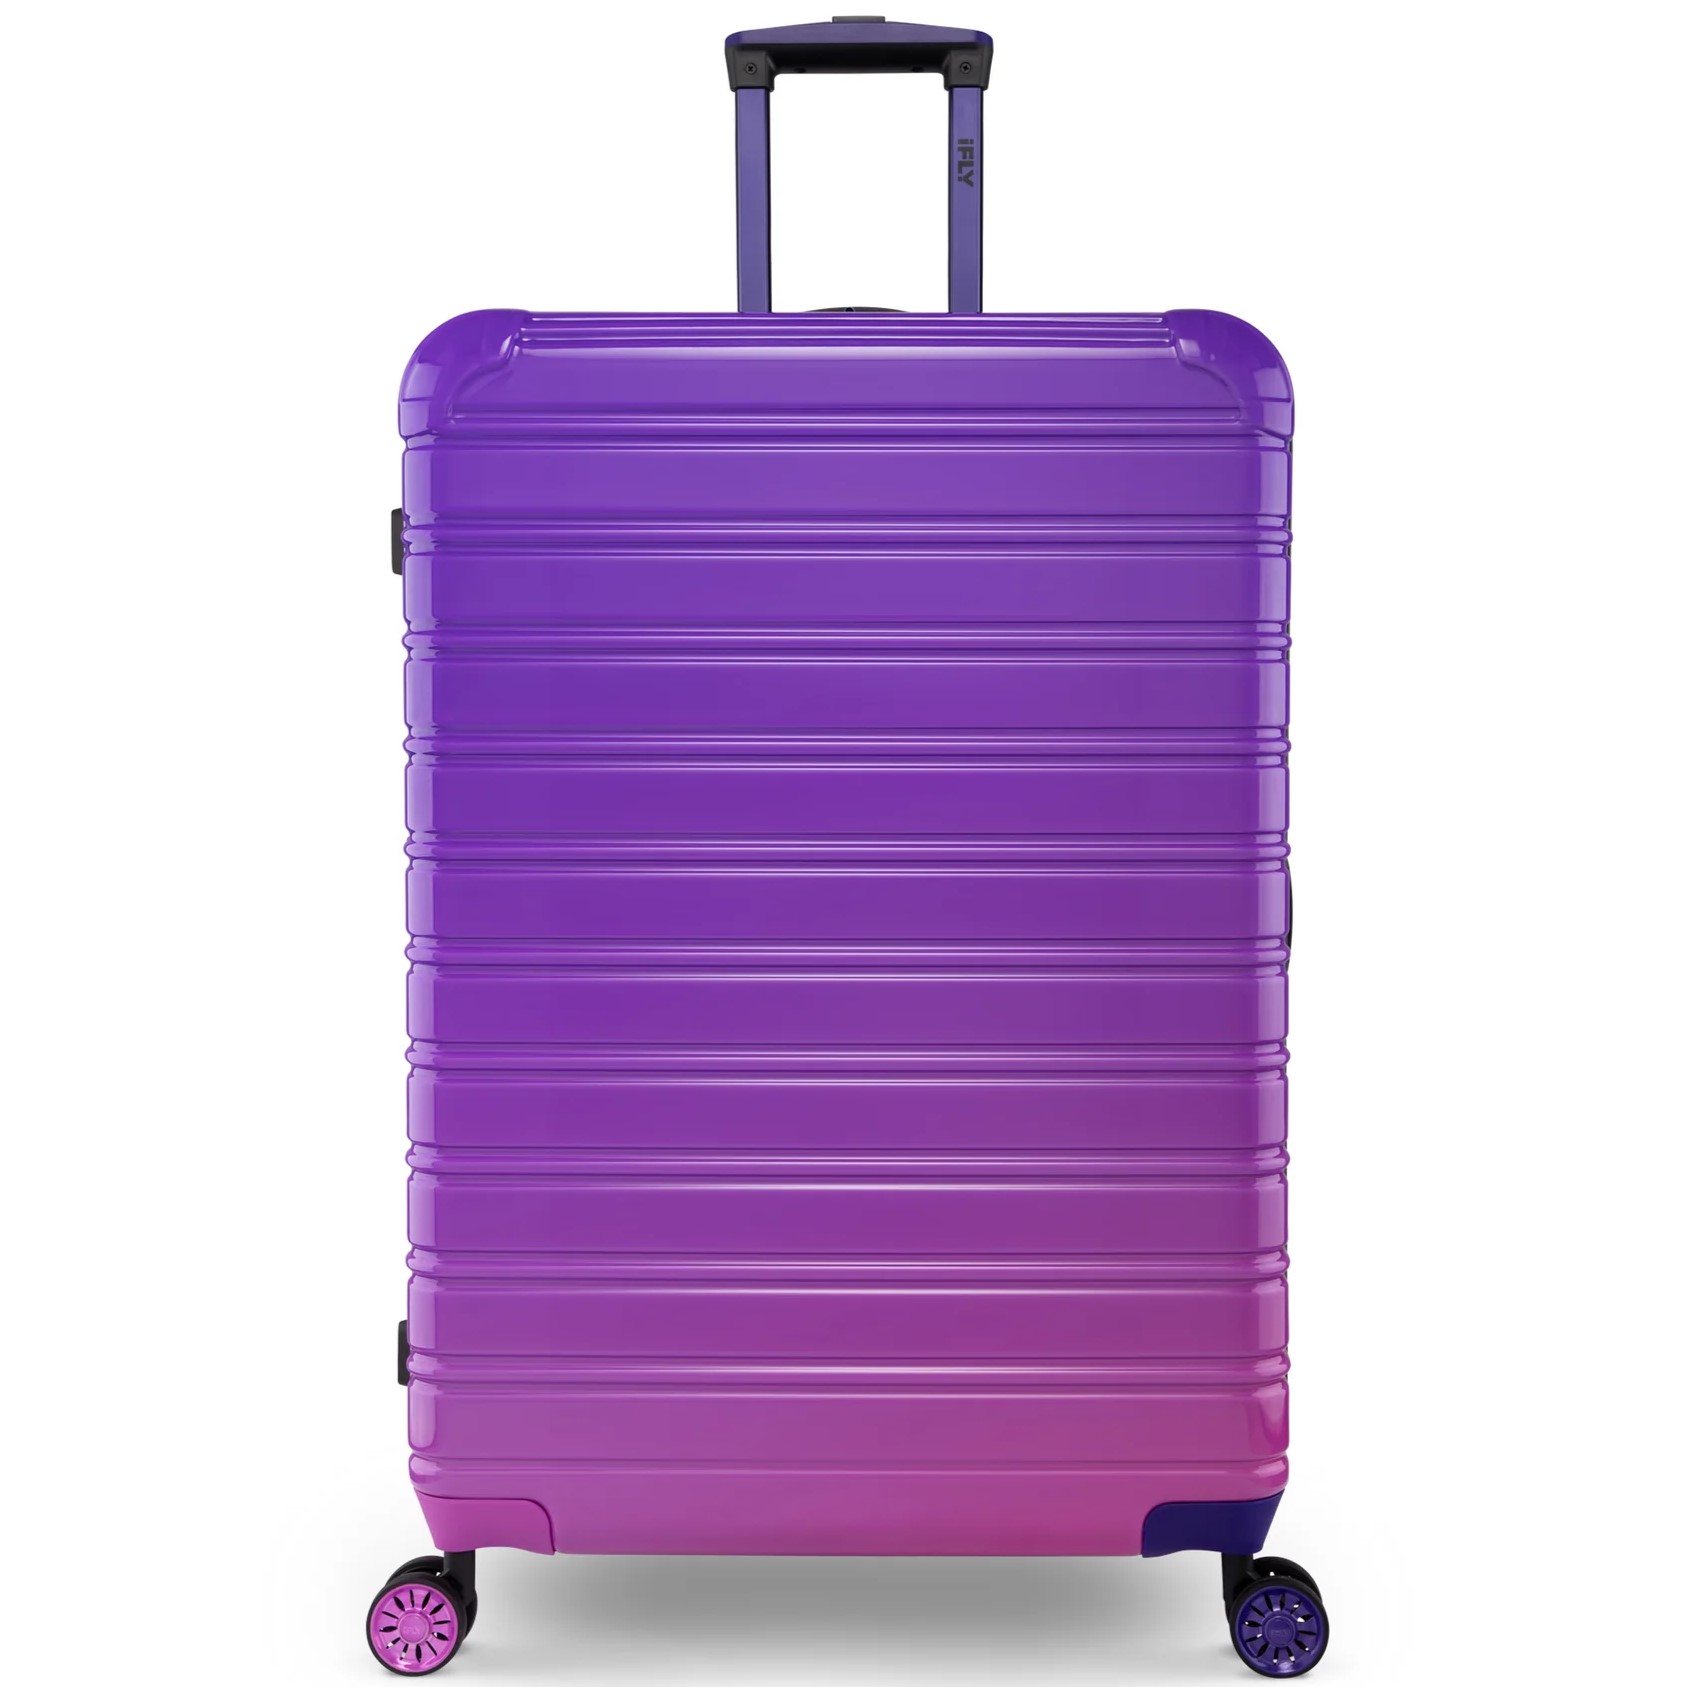 VALI MÀU TÍM LOANG DU LỊCH IFLY FIBERTECH OMBRE HARDSIDE LUGGAGE IN MIDNIGHT BERRY 15